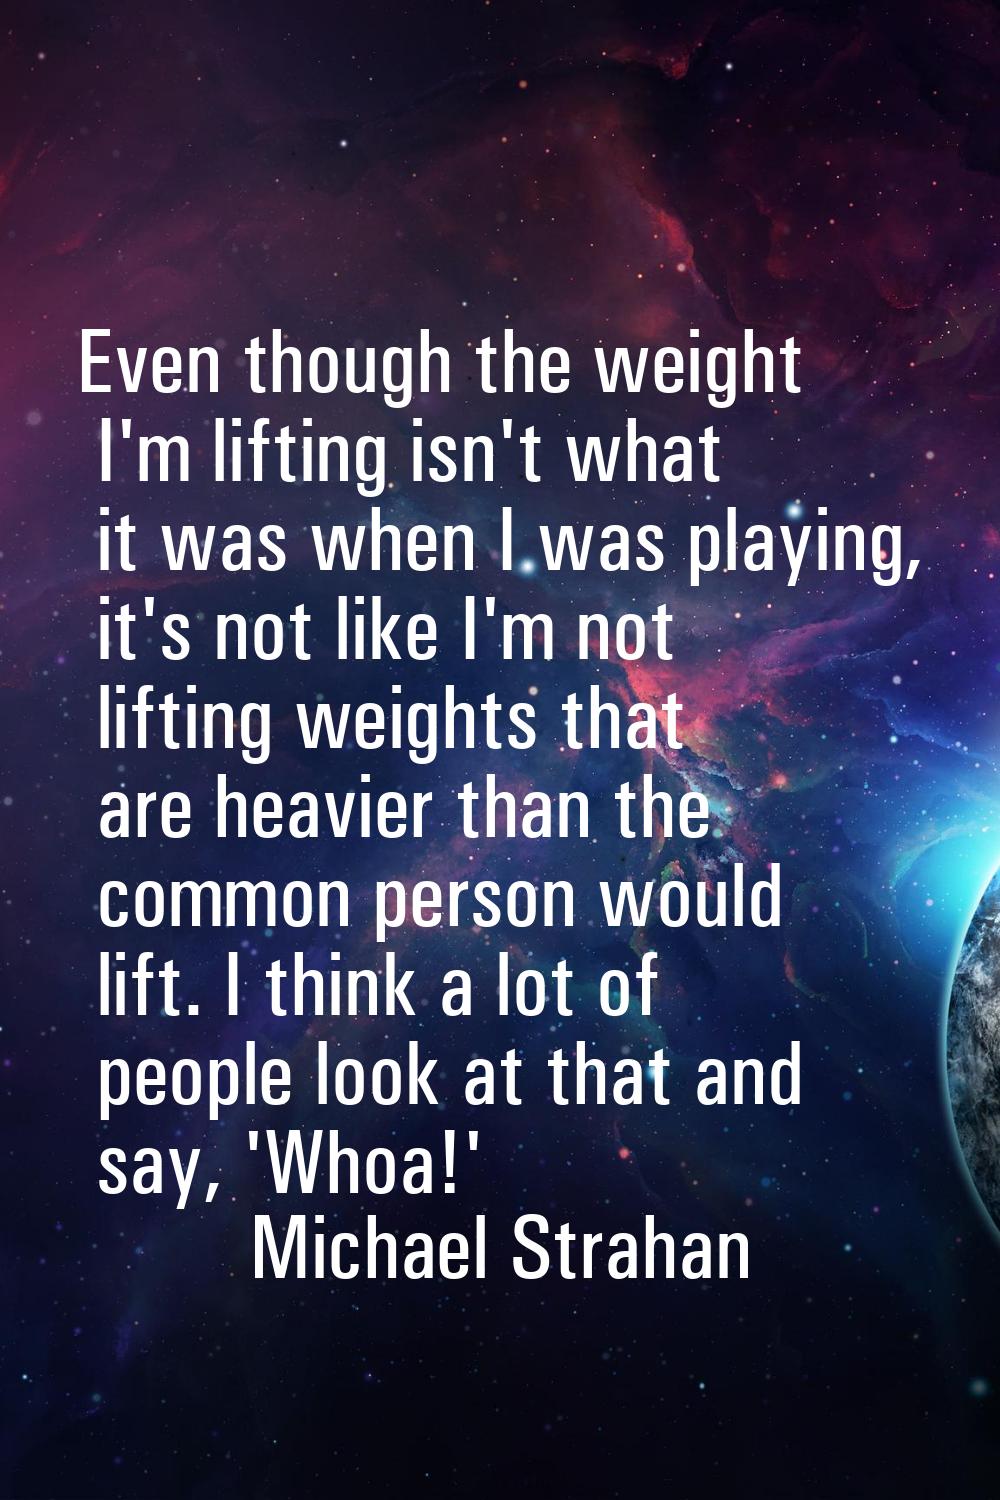 Even though the weight I'm lifting isn't what it was when I was playing, it's not like I'm not lift